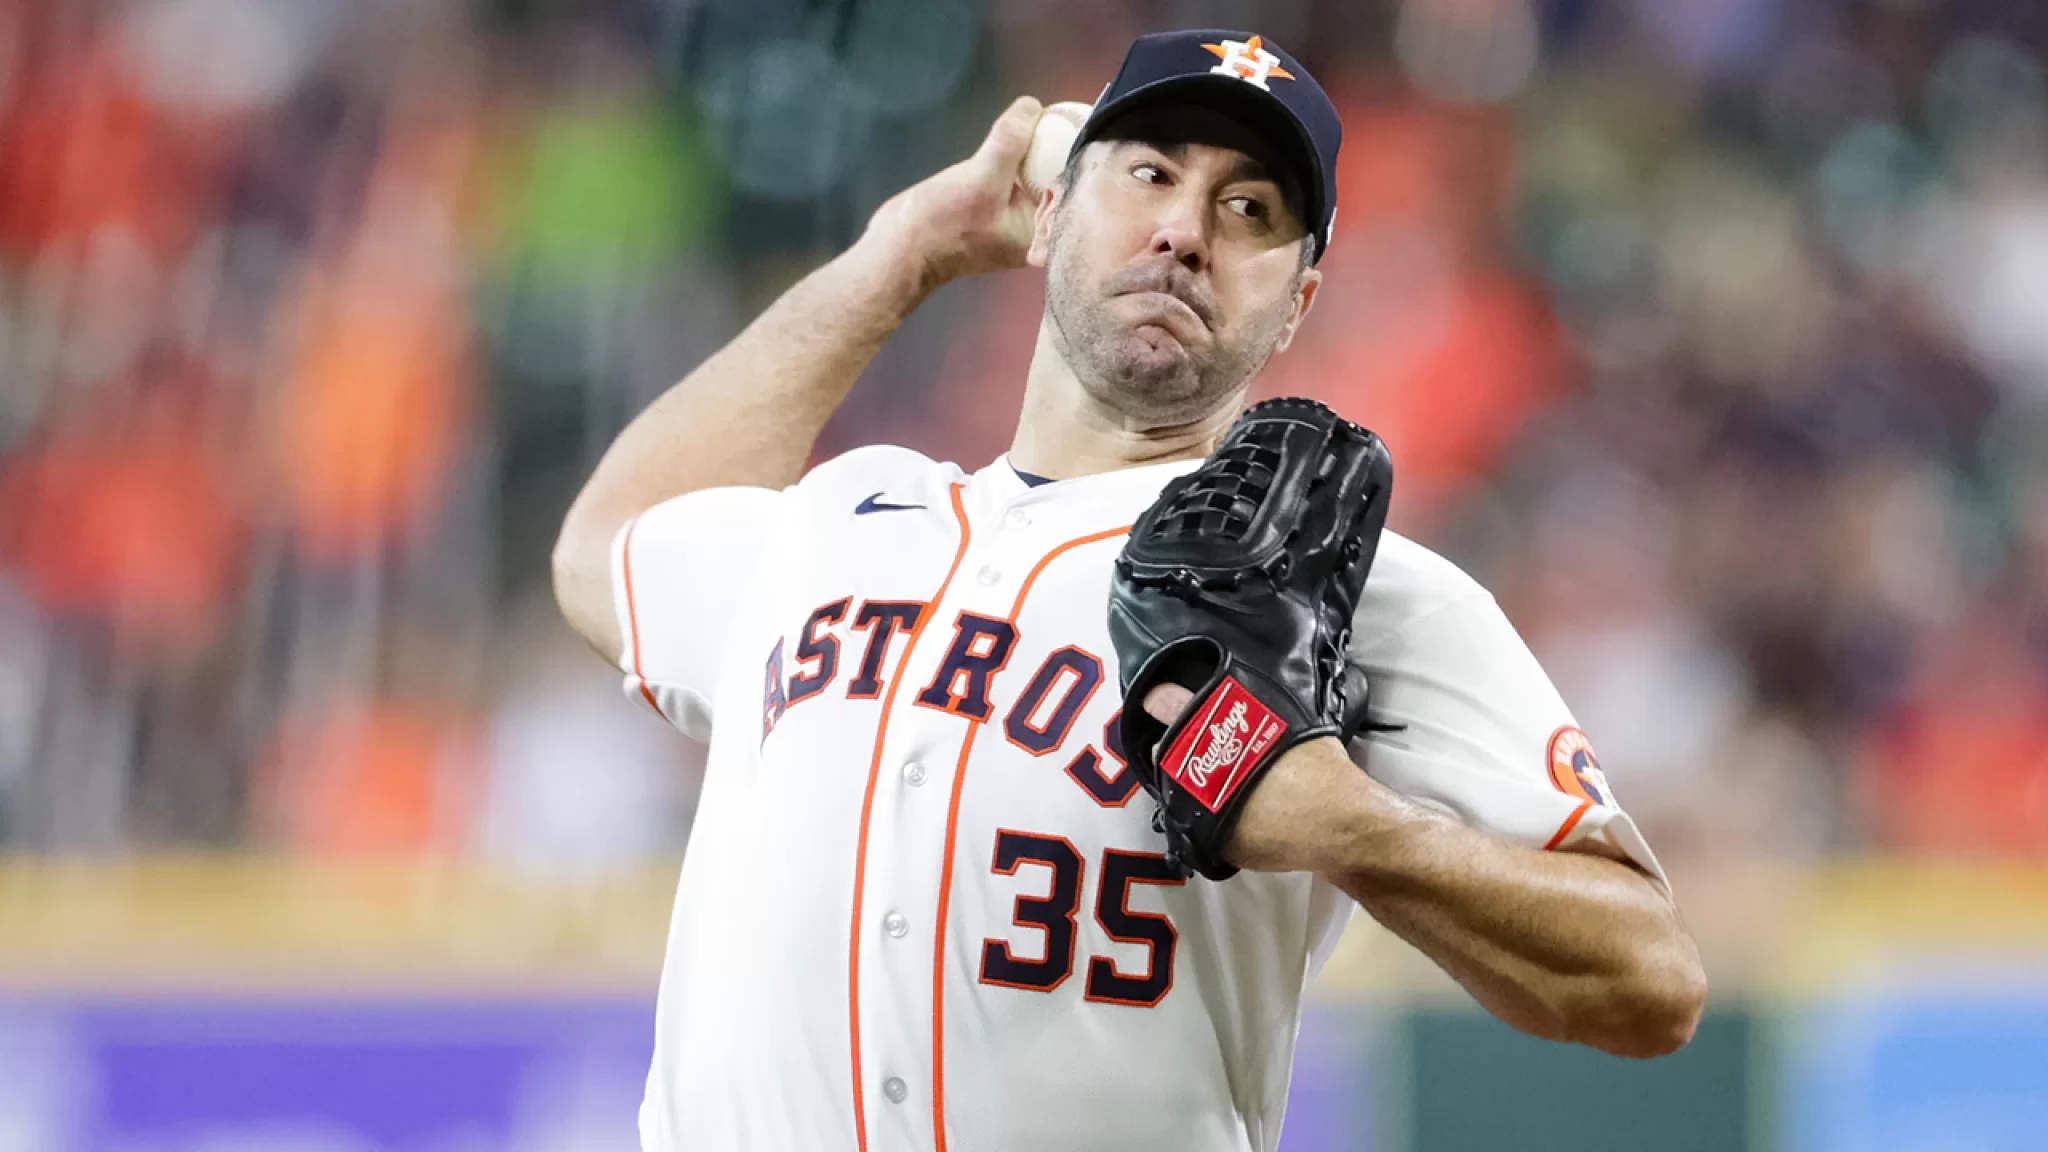 Justin Verlander spins six hitless innings in the Astros 4-2 win